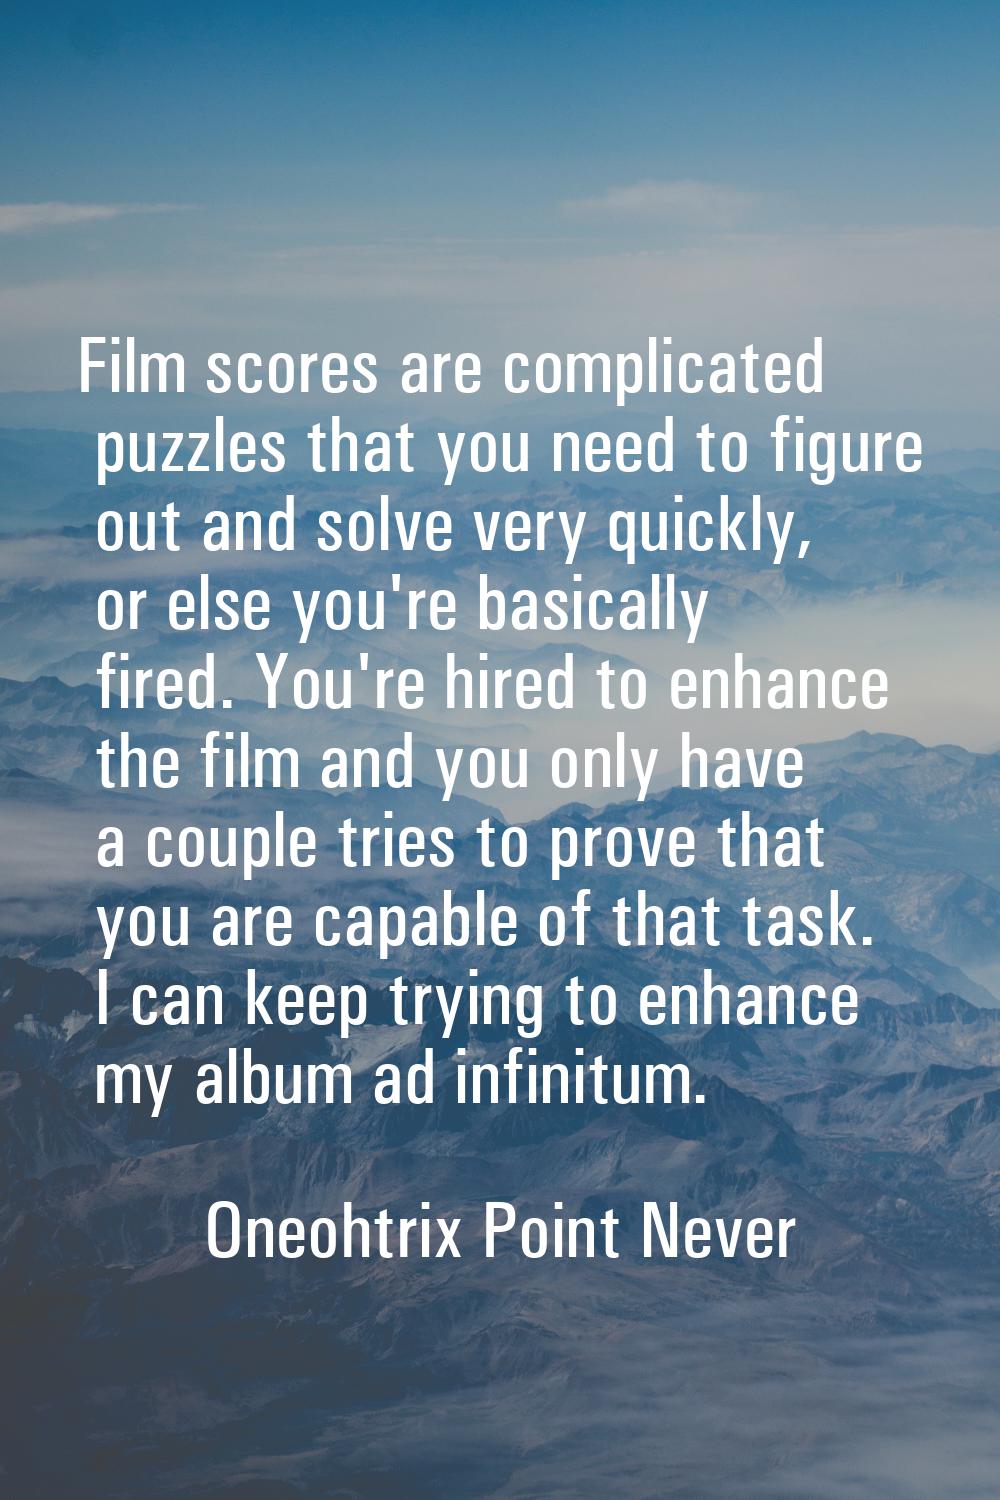 Film scores are complicated puzzles that you need to figure out and solve very quickly, or else you